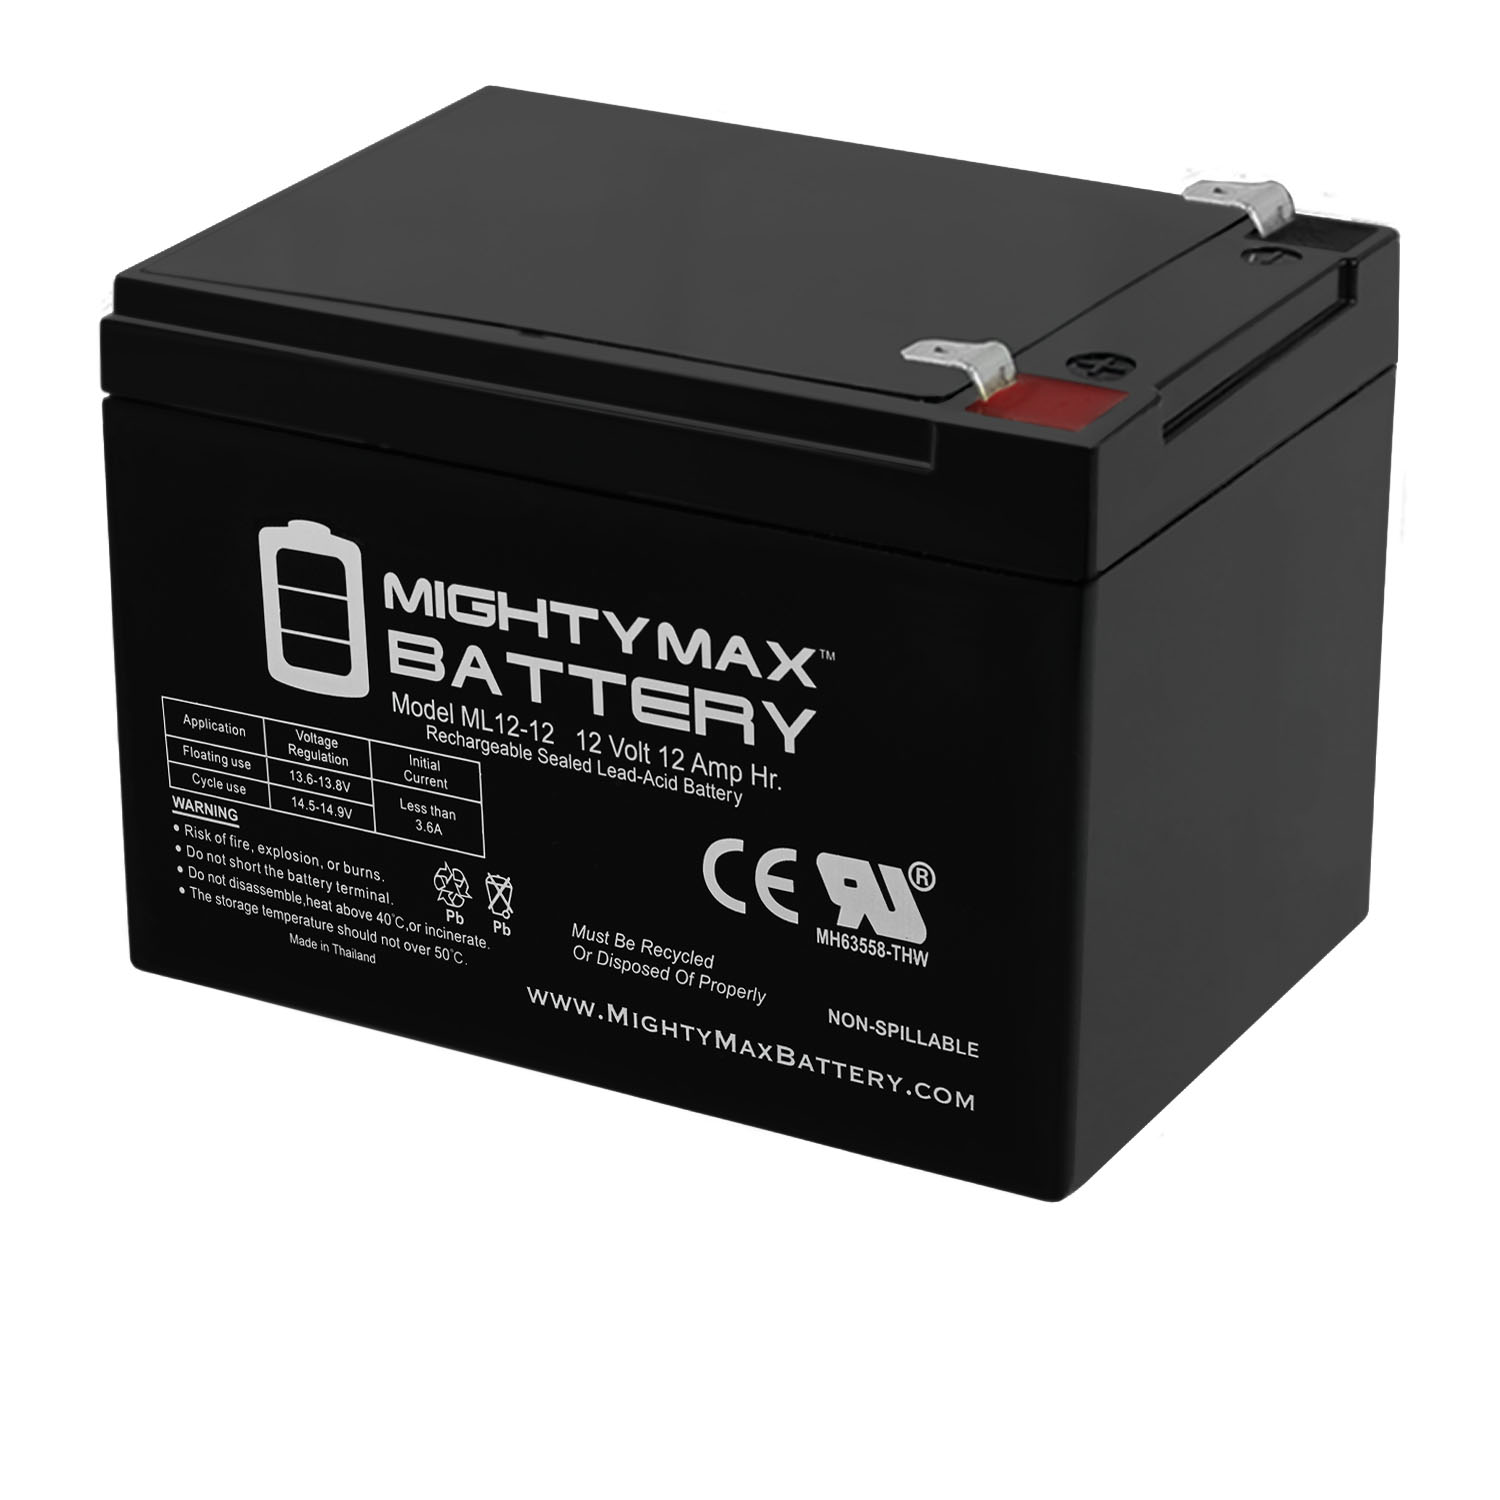 NPP NP6-12Ah F1, 6V 12Ah Battery, Rechargeable Sealed Lead Acid 6V 12Ah  Battery F1 Terminal Replace 6FM12, 6-DW-12 AB12120 Distribution Control,  Solar